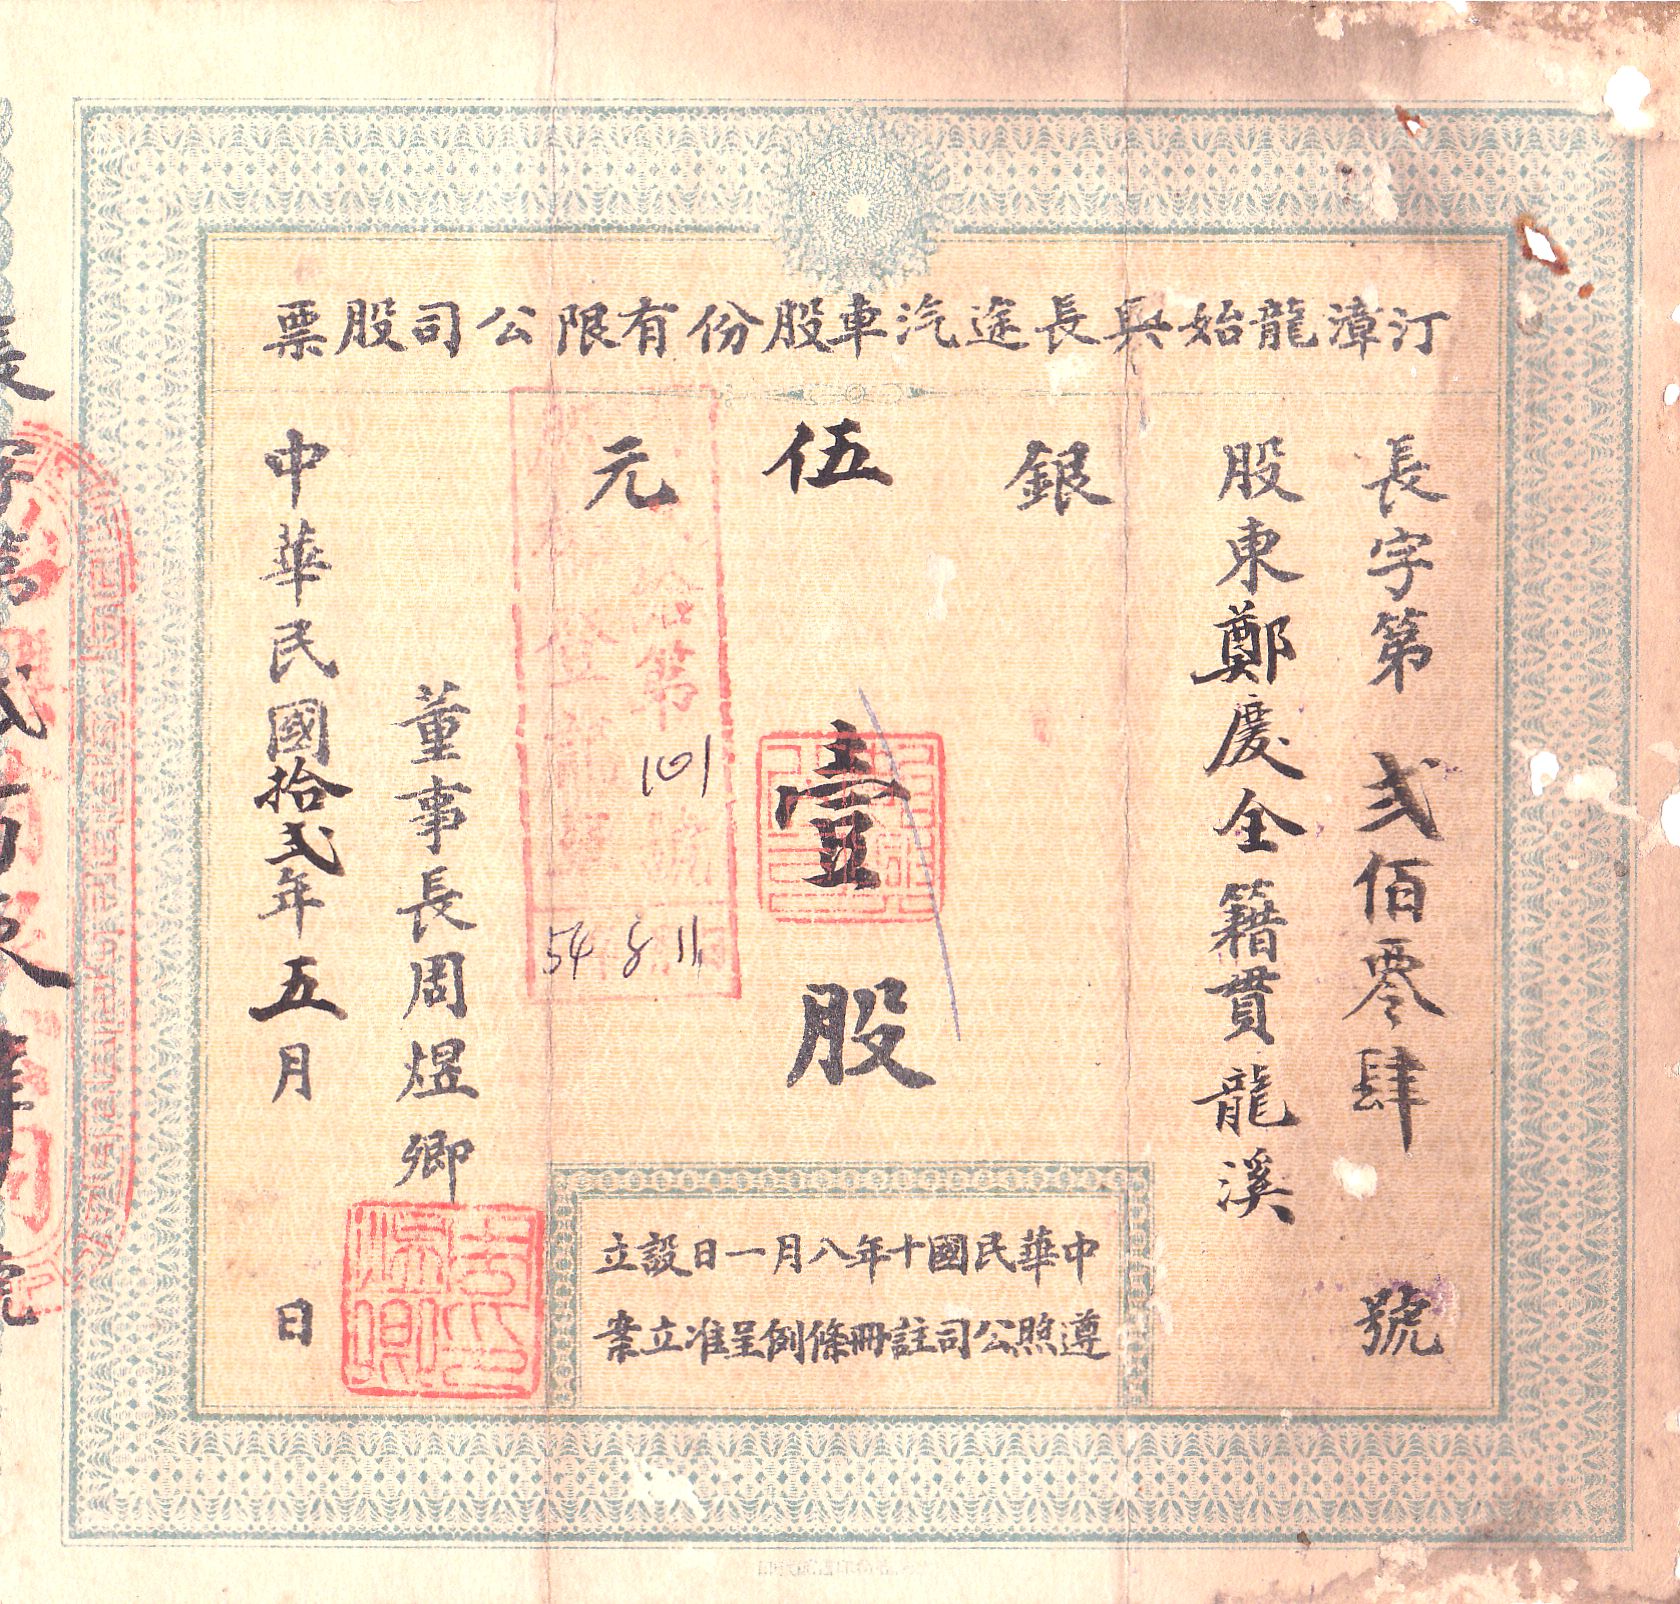 S0190, Tse-Hsing Motor Car Co., Stock Certificate 1 Share, China 1923 - Click Image to Close